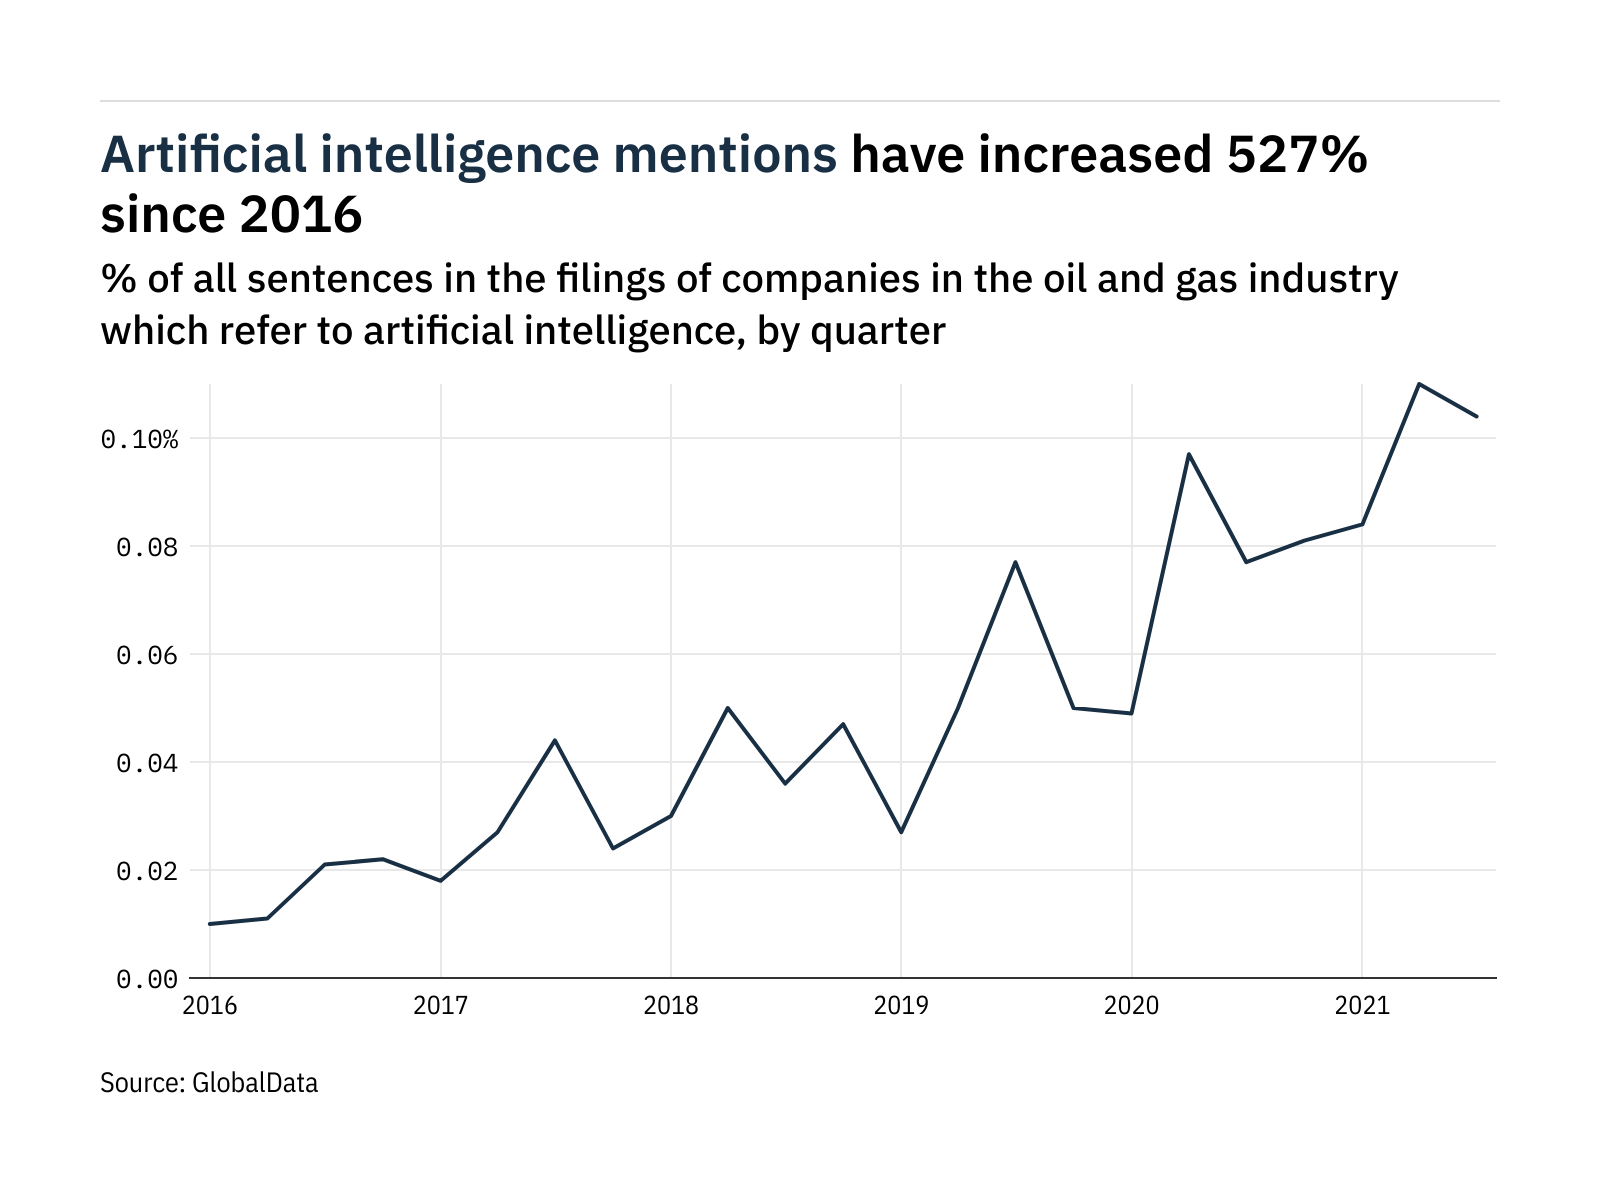 Filings buzz in oil and gas industry: 35% increase in artificial intelligence mentions since Q3 of 2020